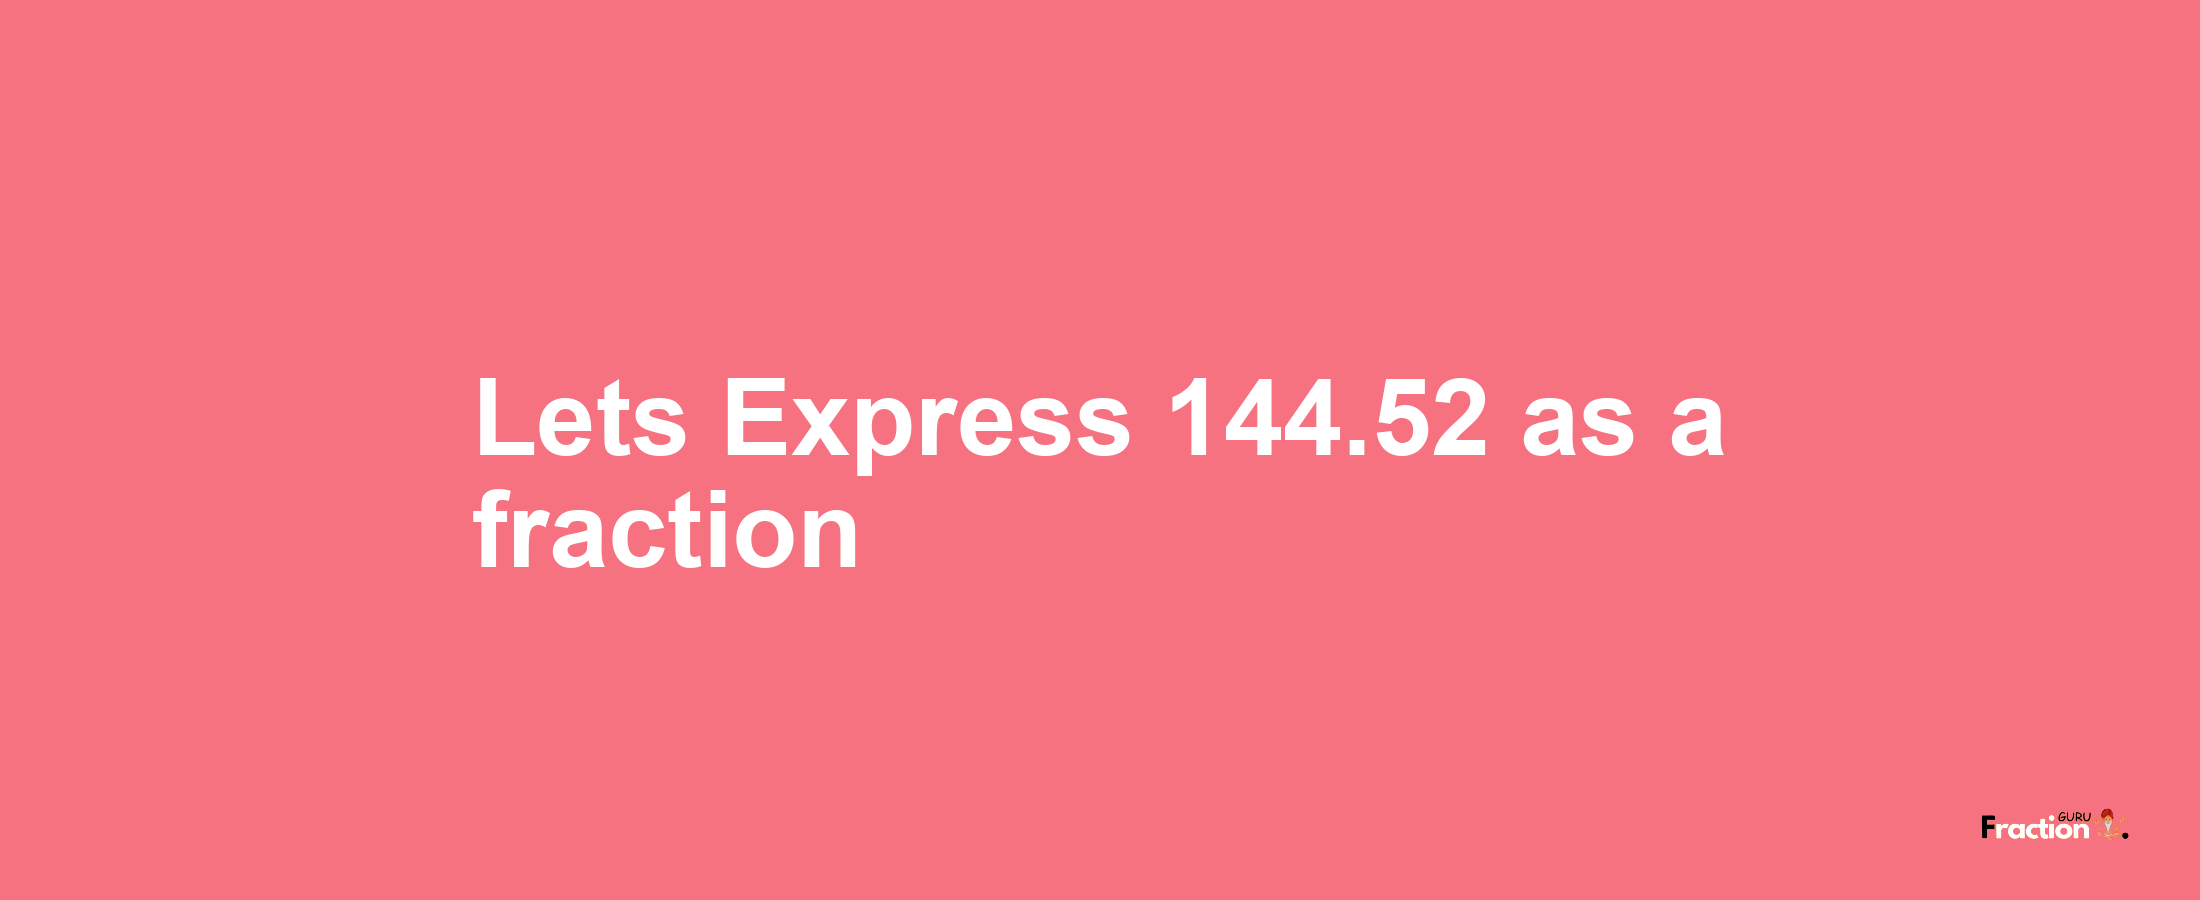 Lets Express 144.52 as afraction